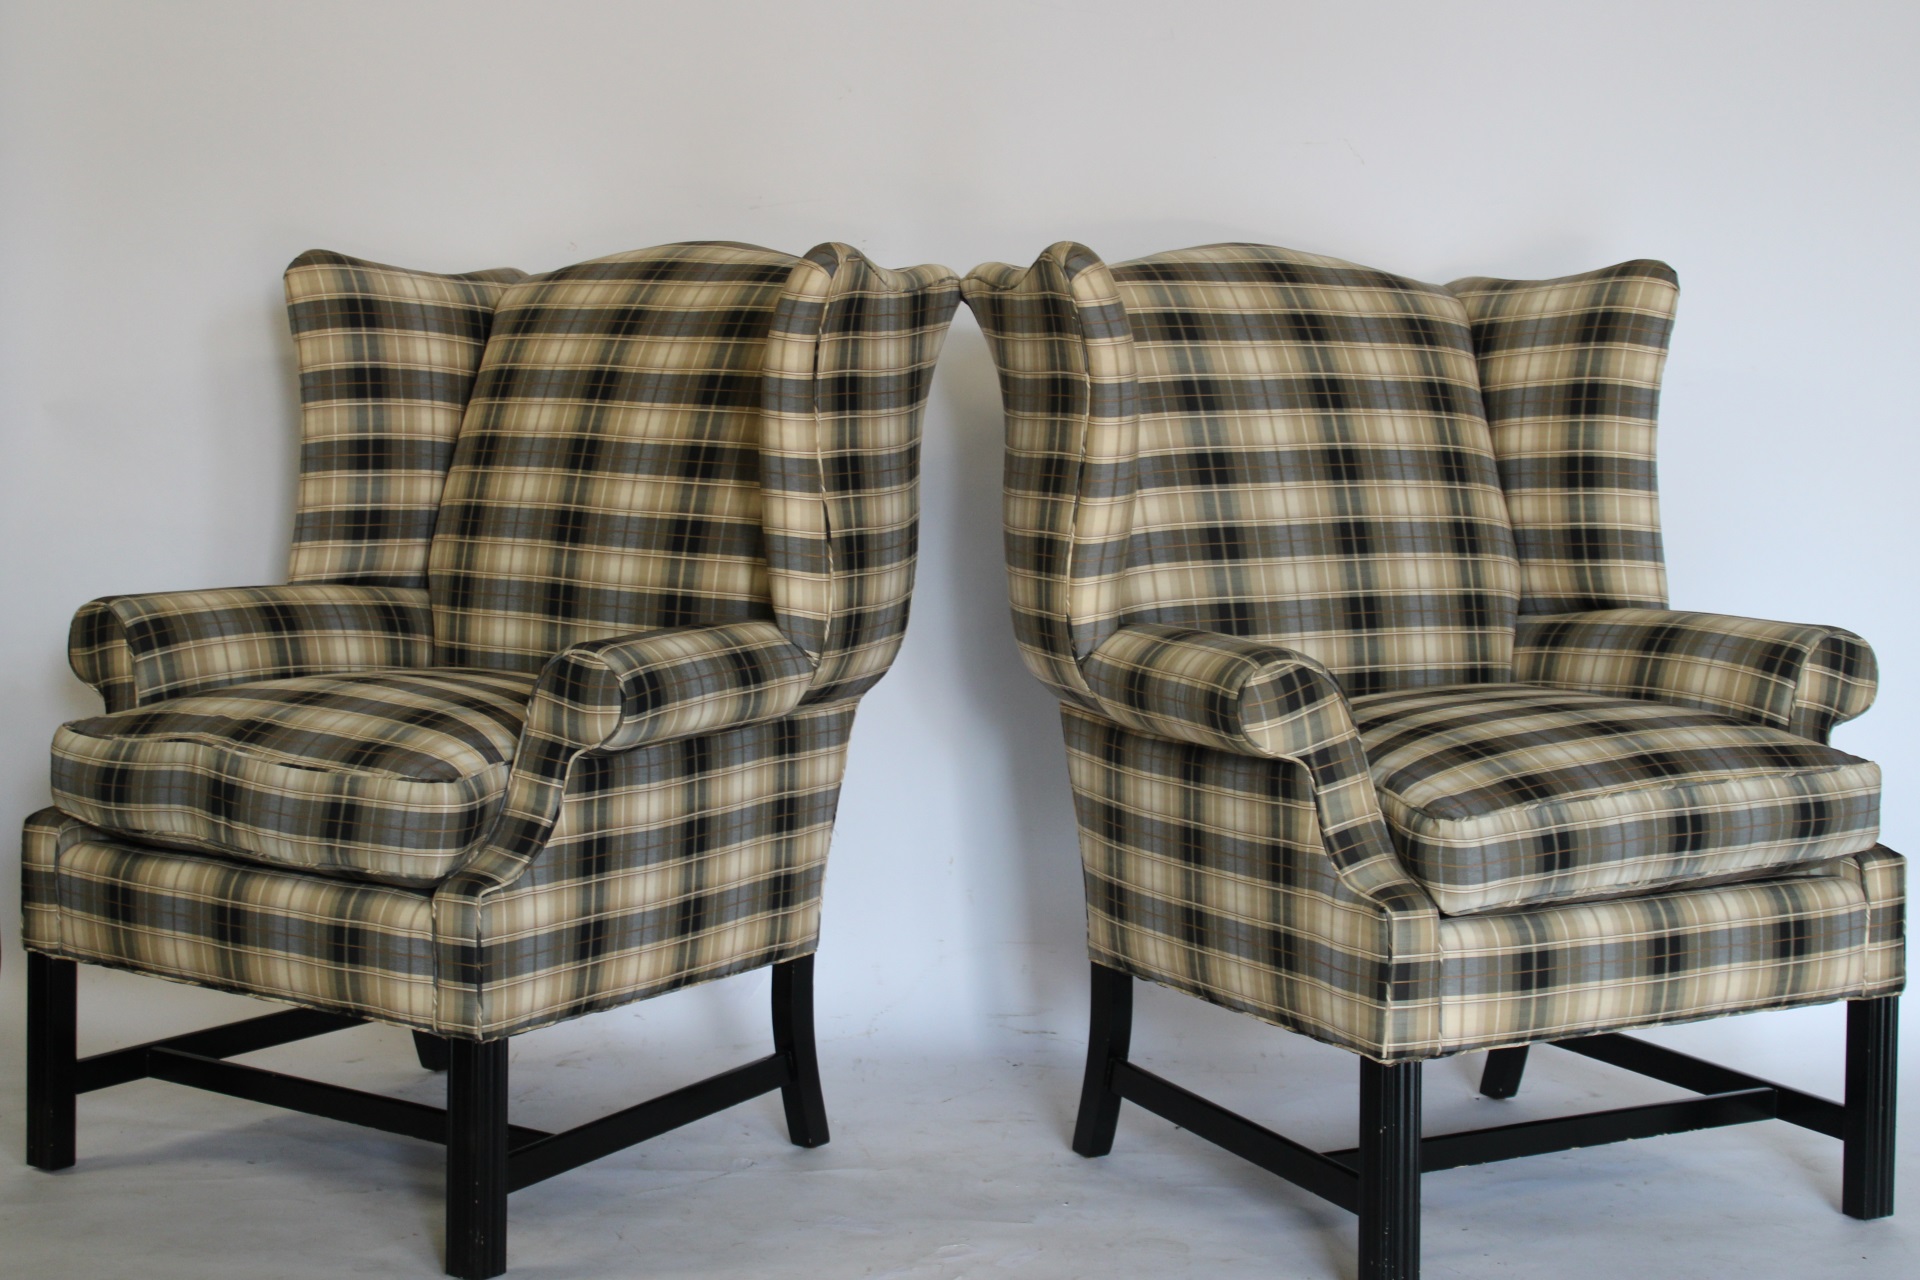 A VINTAGE PAIR OF UPHOLSTERED WING